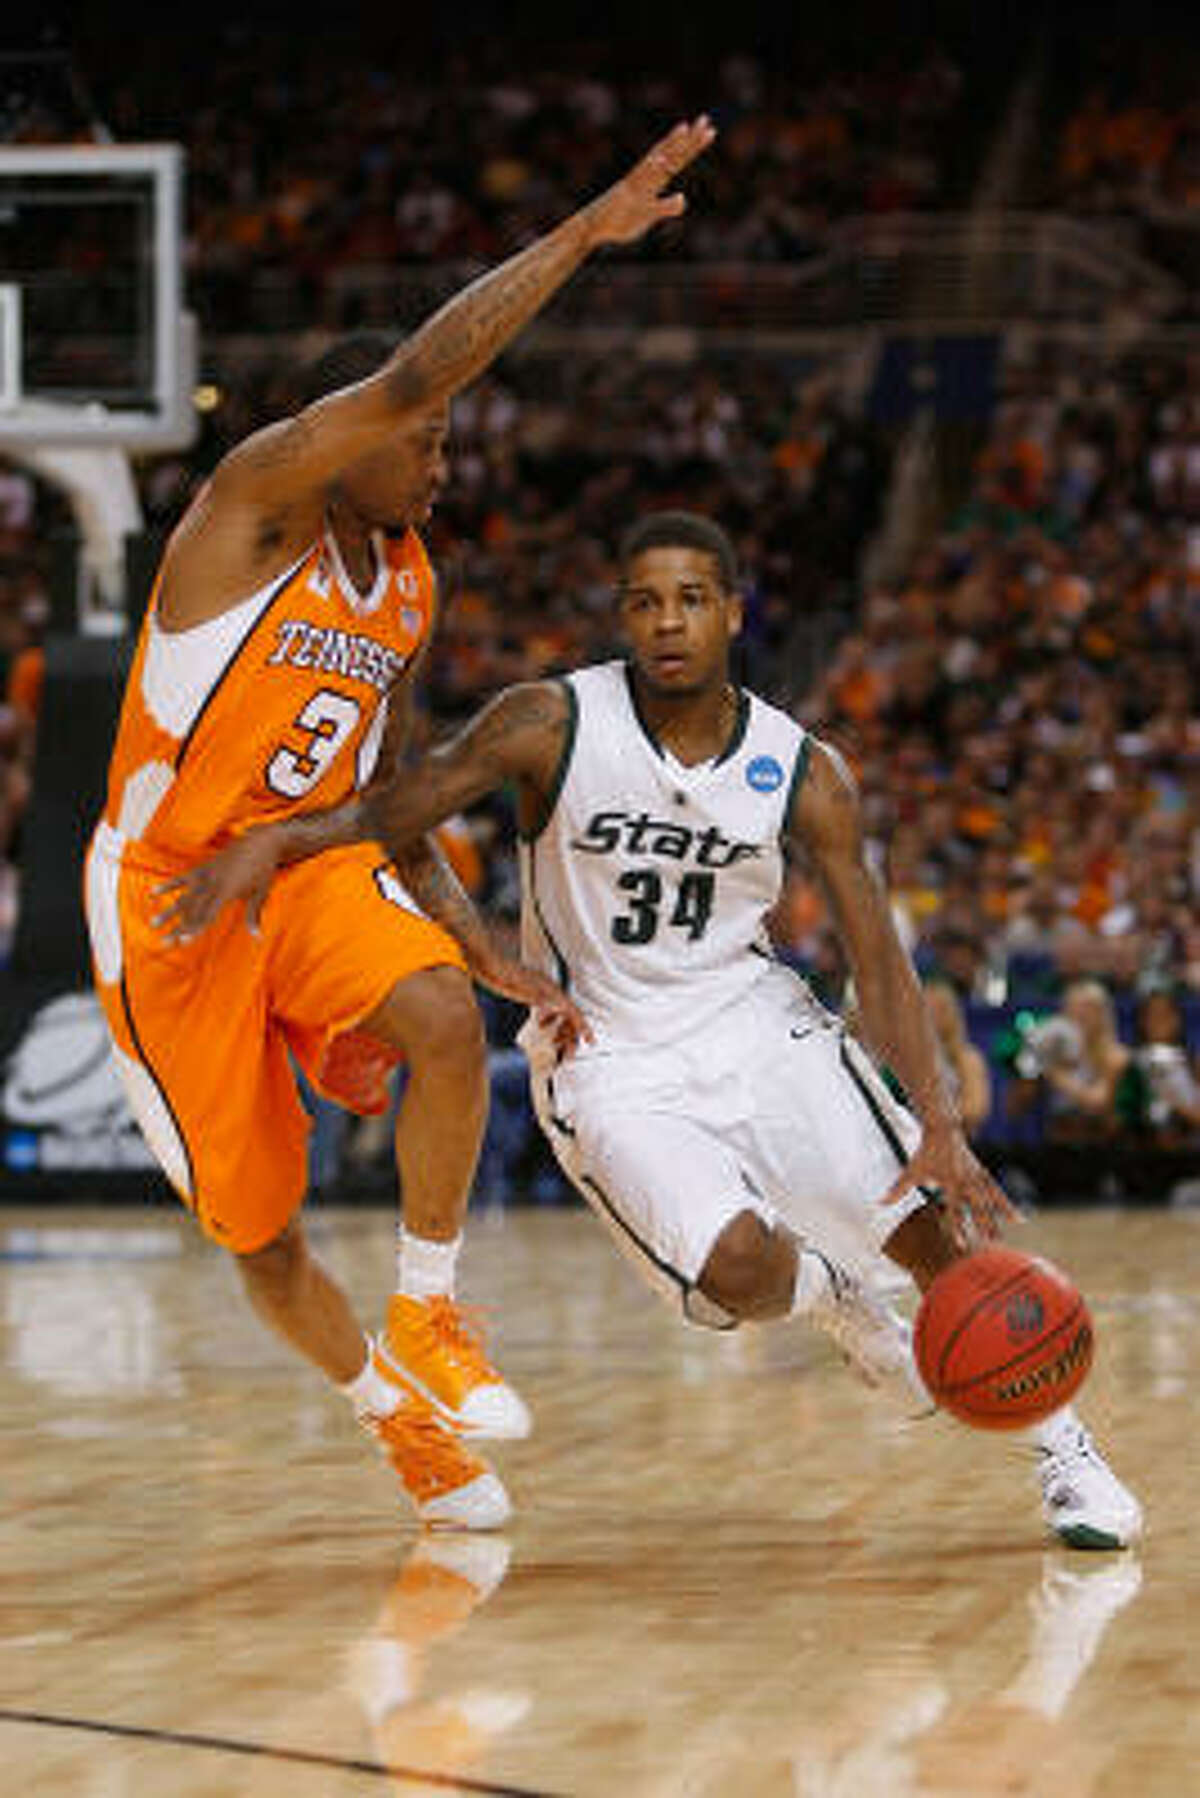 Michigan State's Korie Lucious drives to the basket against Bobby Maze.